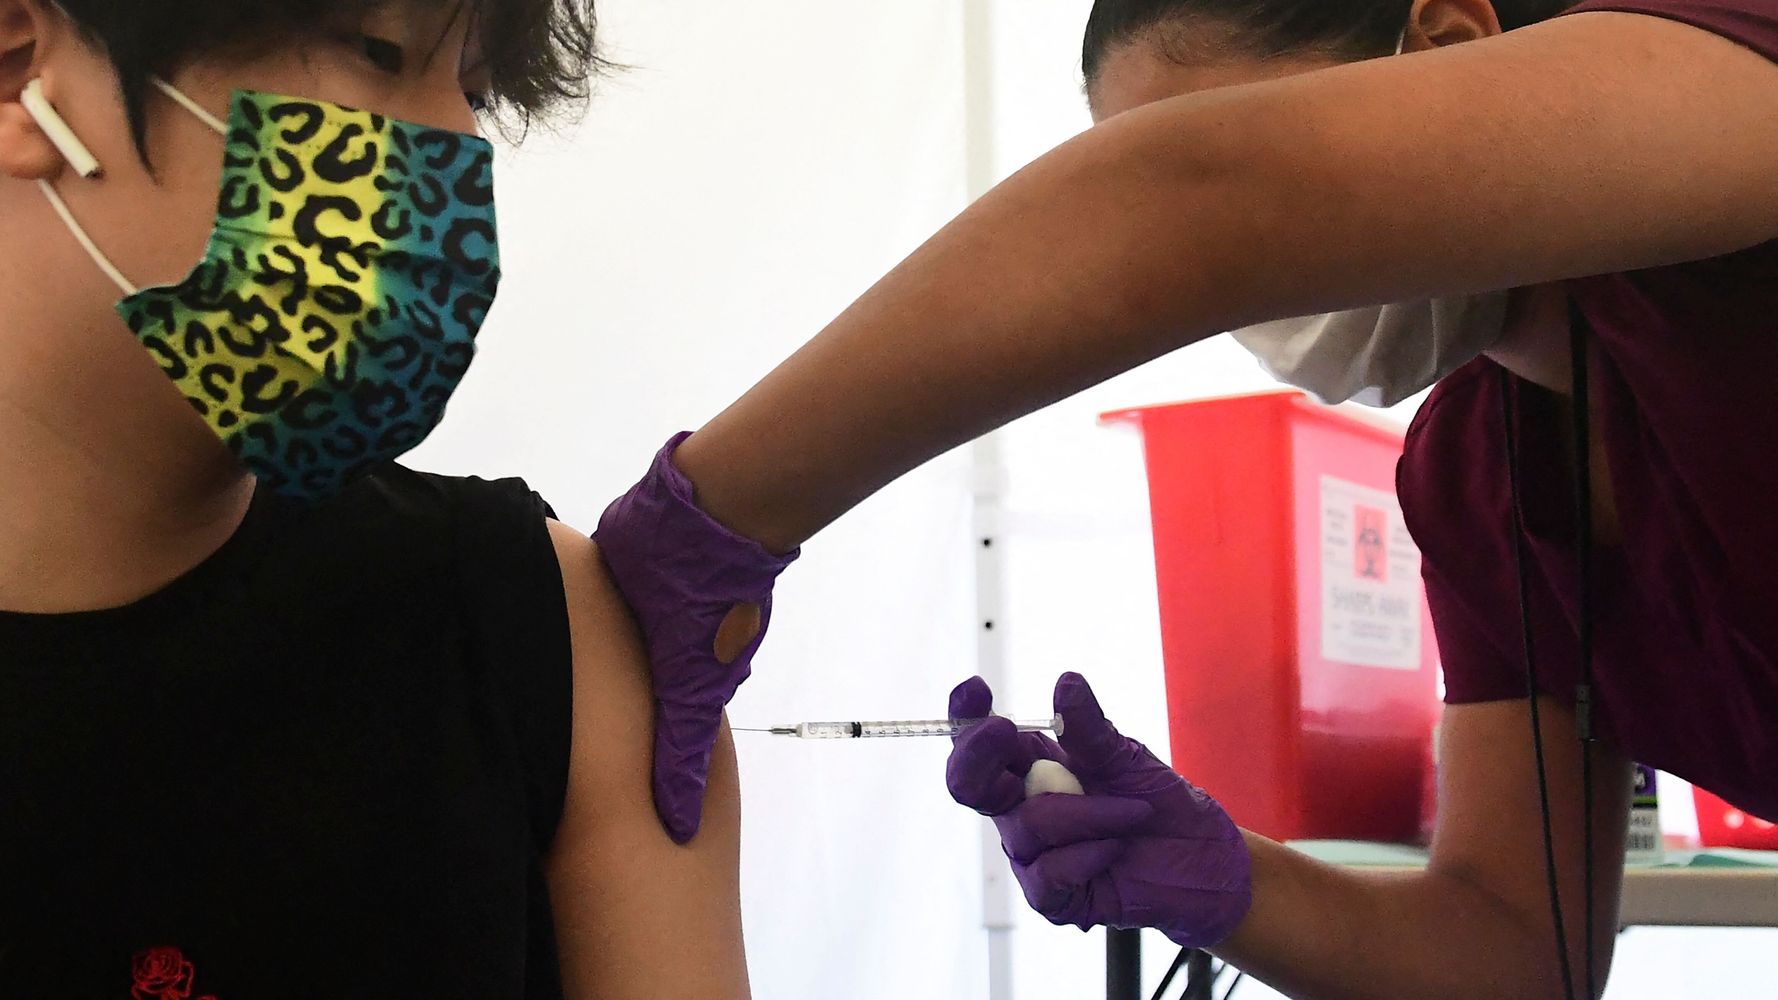 Top Vaccination Official In Tennessee Says COVID Conspiracy Theories Led To Her Firing